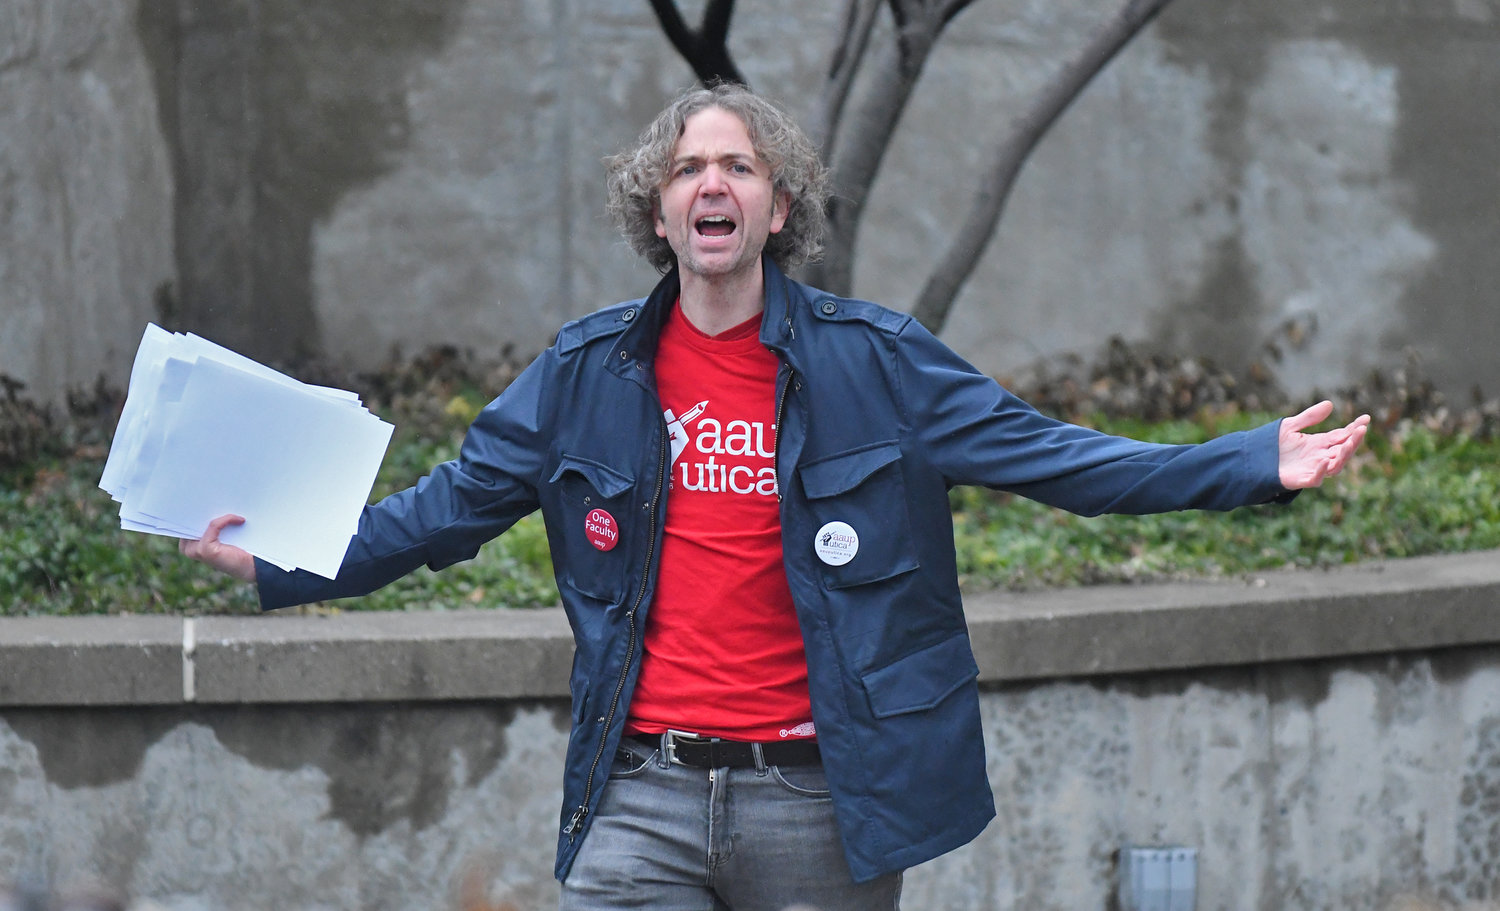 Philosophy Professor Douglas Edwards pleads for transparency Friday, Feb. 17 during a protest at Utica University.